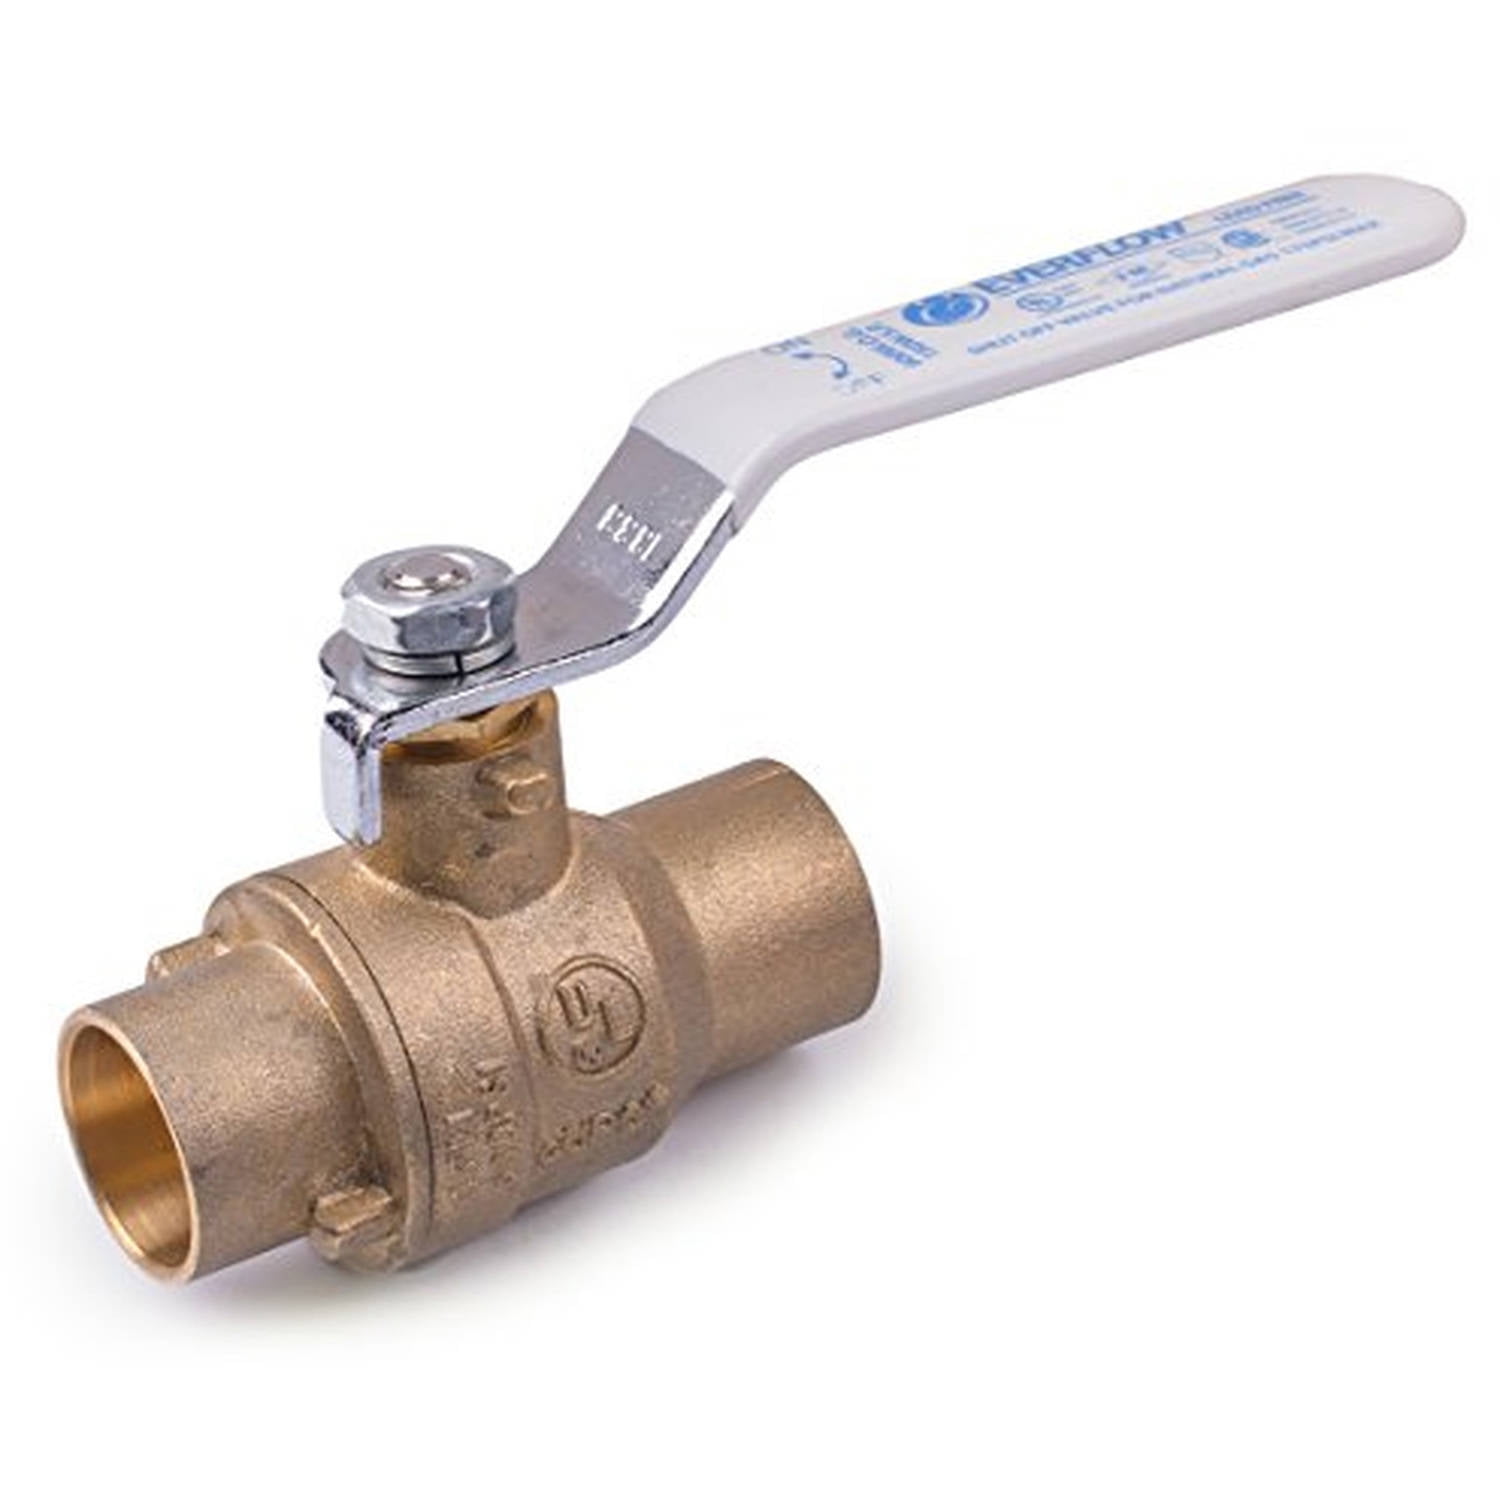 Everflow Supplies 600T001-NL Lead Free Full Port Forged Brass Ball Valve with Female Threaded IPS Connections 1